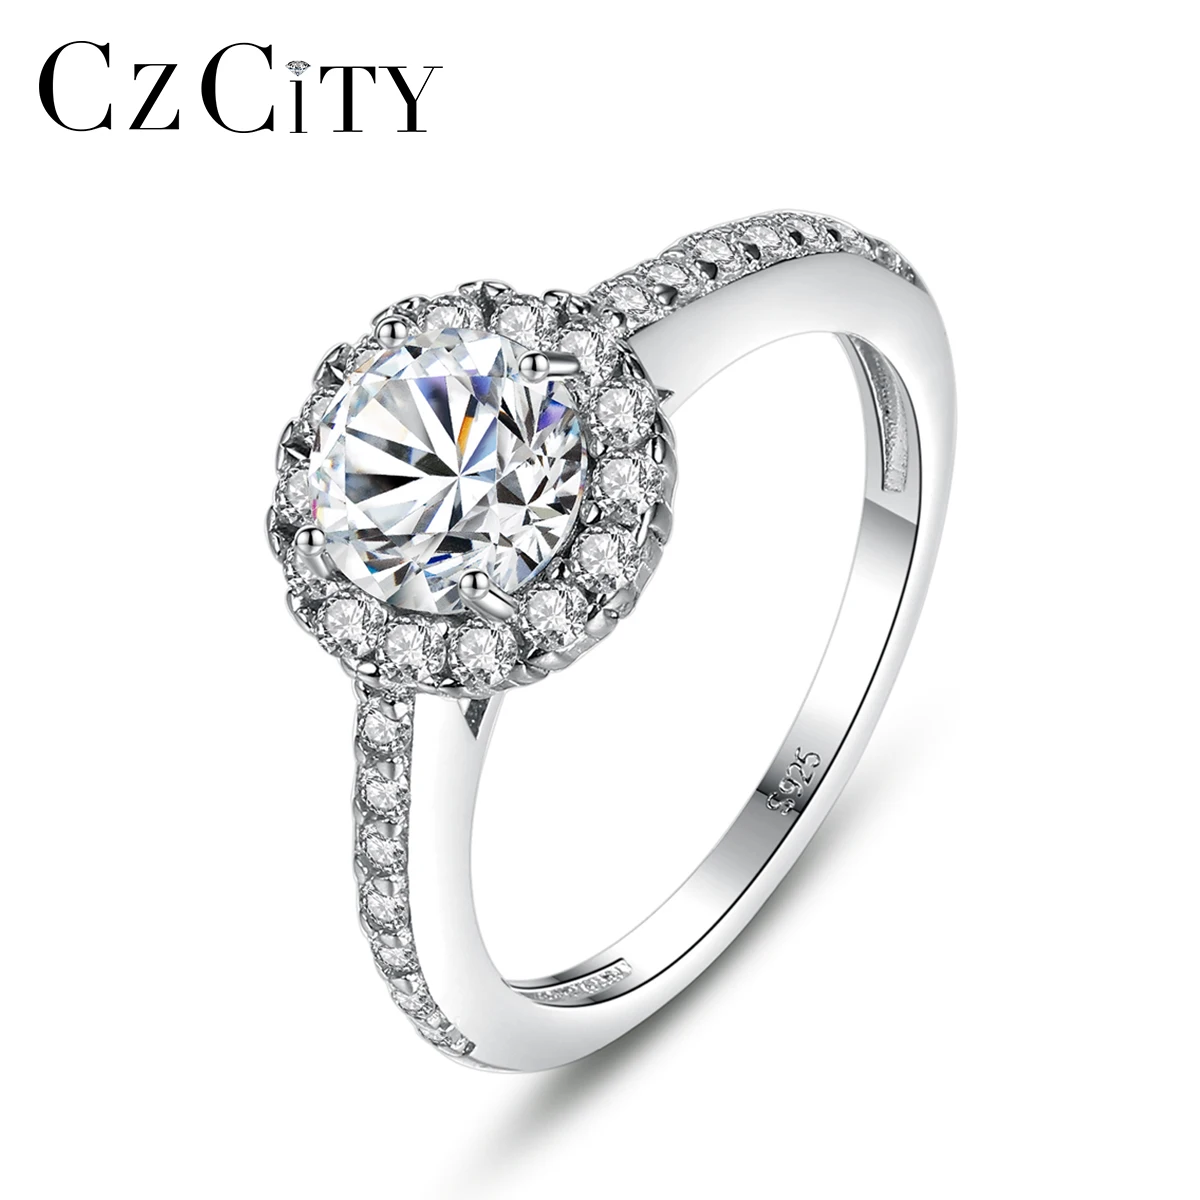 

CZCITY 925 Sterling Silver CZ Halo Ring Cubic Zircon Women Wedding Engagement Eternity Promise Finger Ring Anillos Bijoux Femme